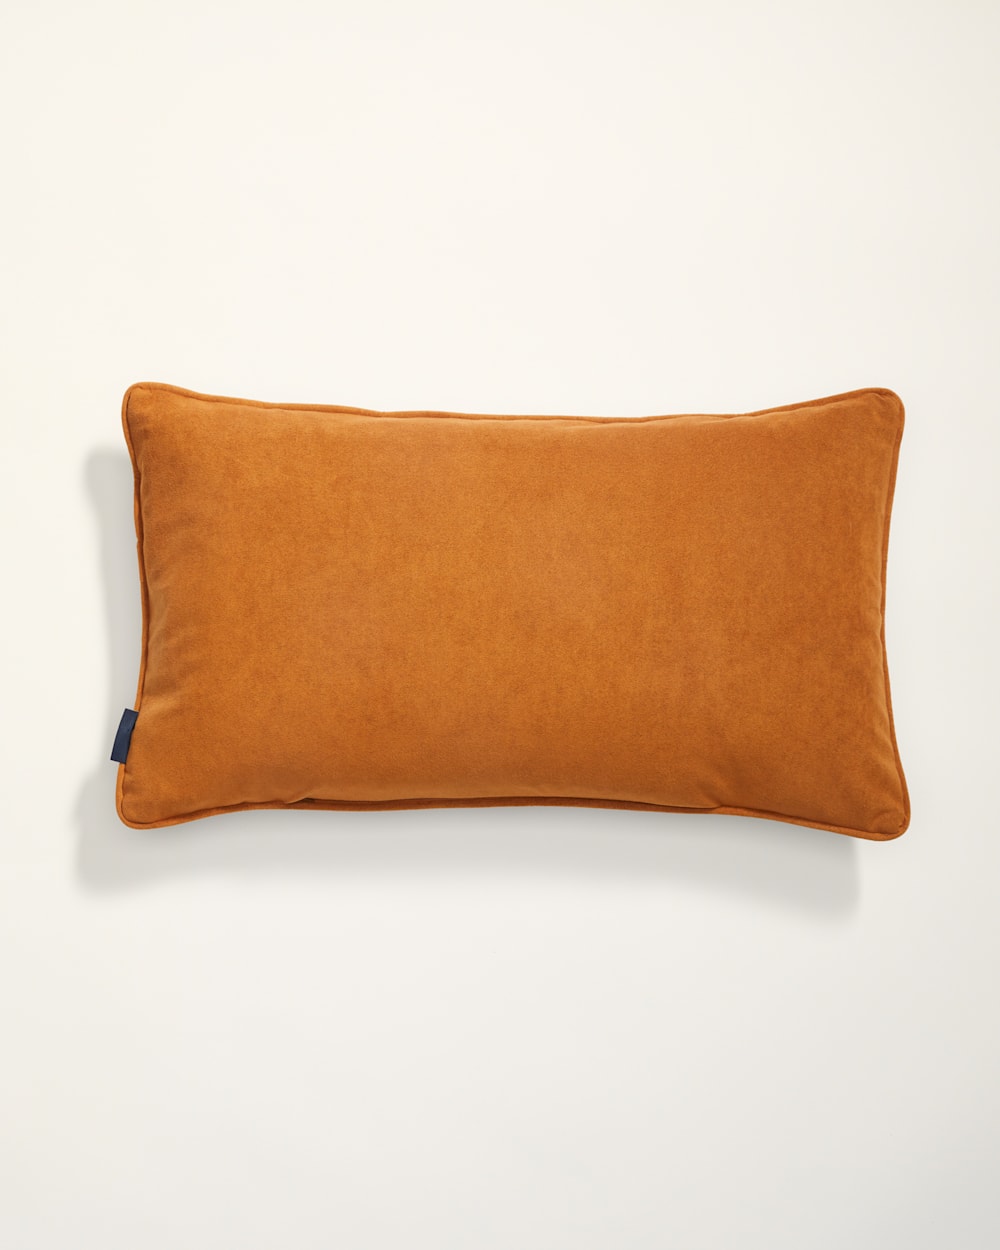 ALTERNATE VIEW OF WYETH TRAIL LUMBAR PILLOW IN BEIGE image number 3